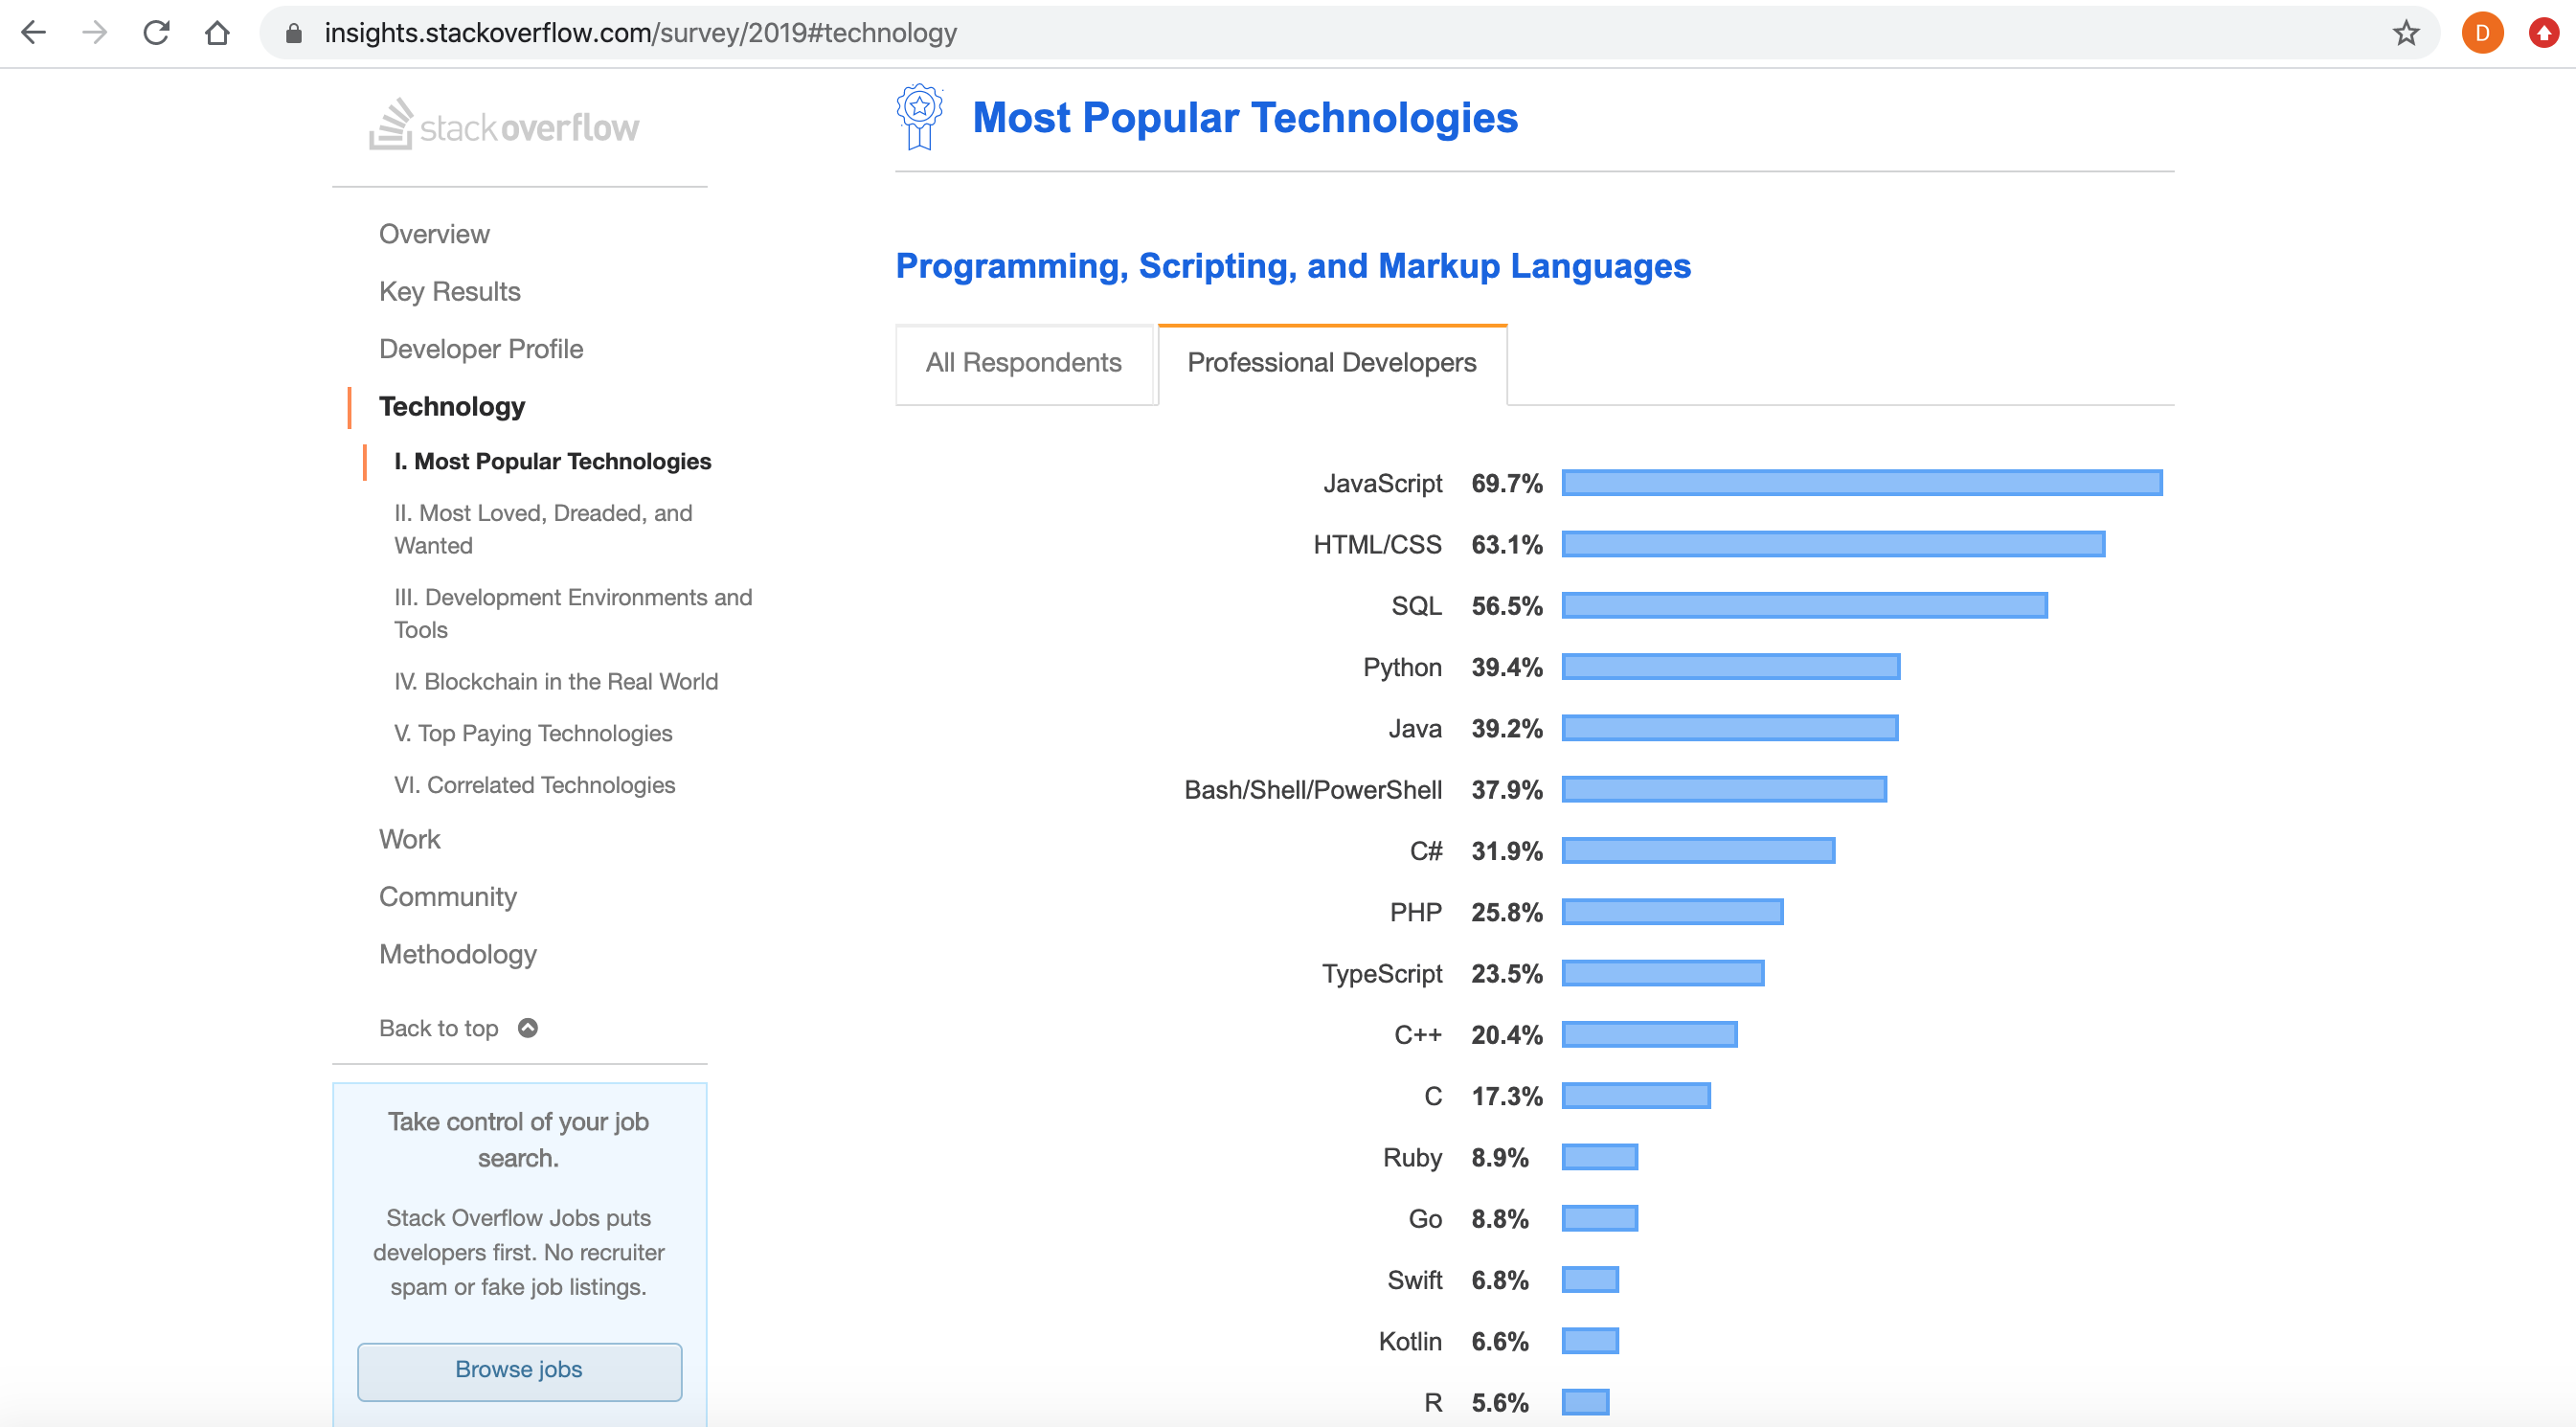 Stackoverflow Programming, Scripting, and Markup Languages Survey 2019